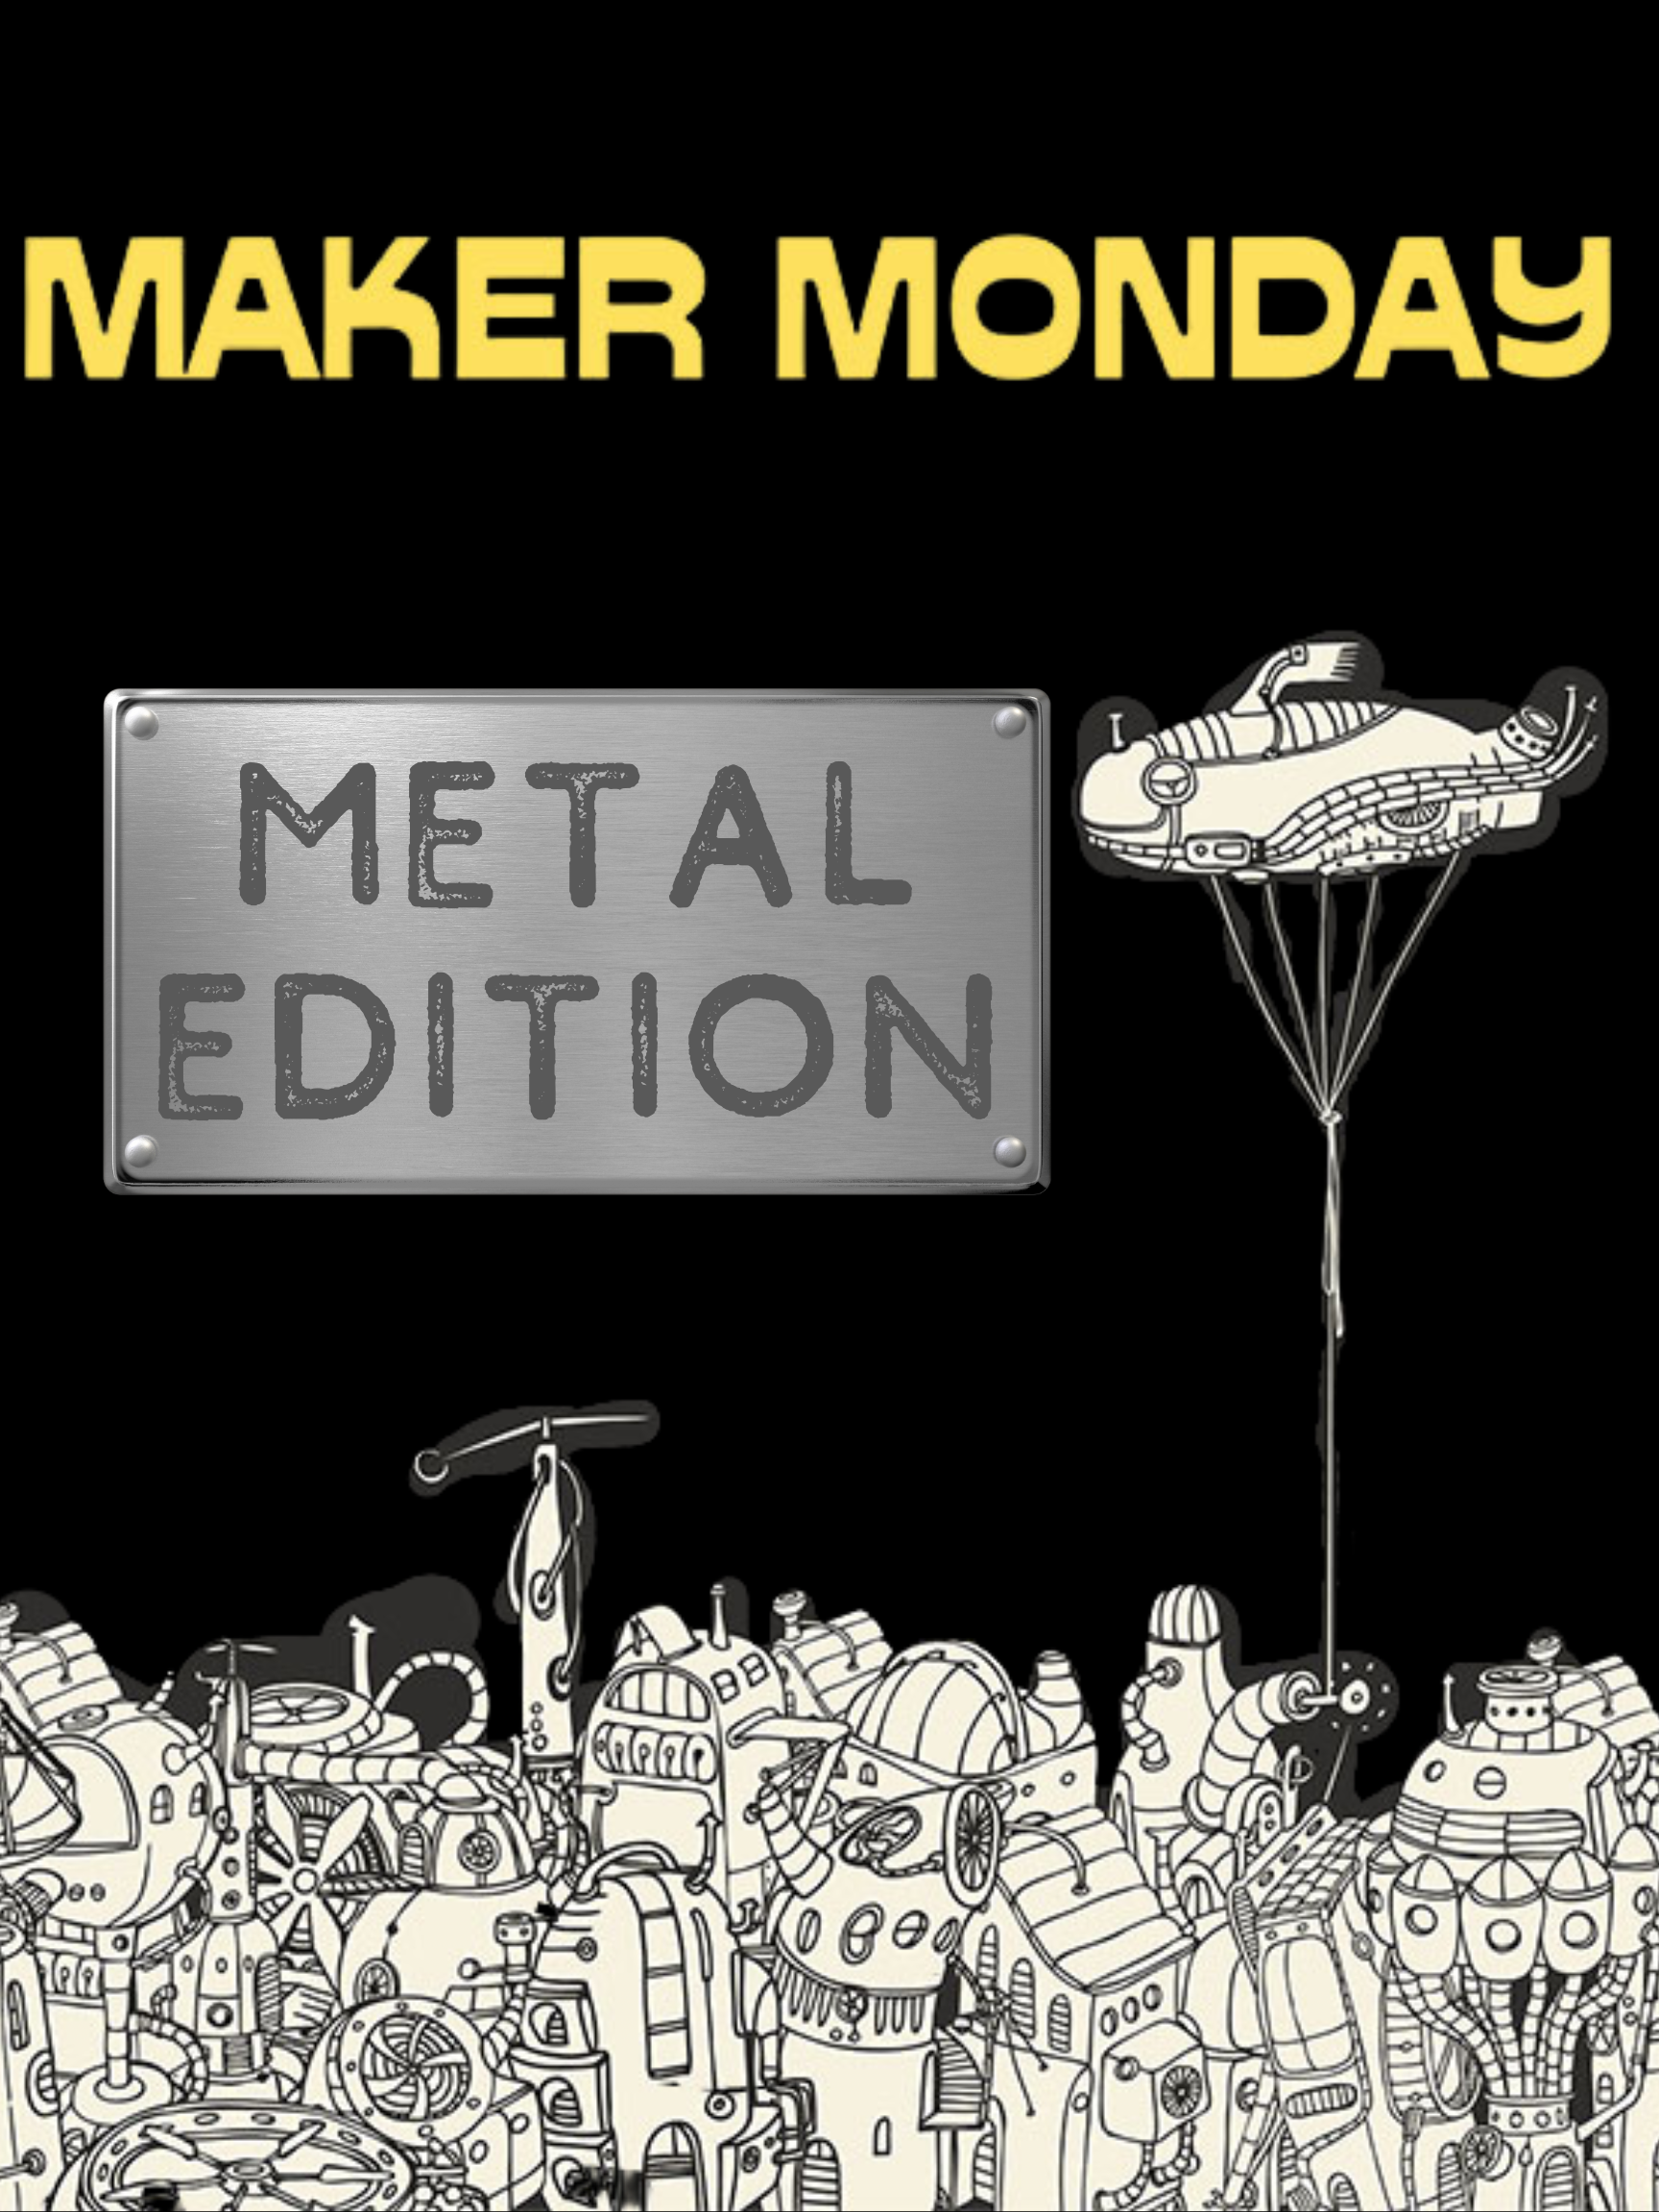 Image of Maker Monday metal edition